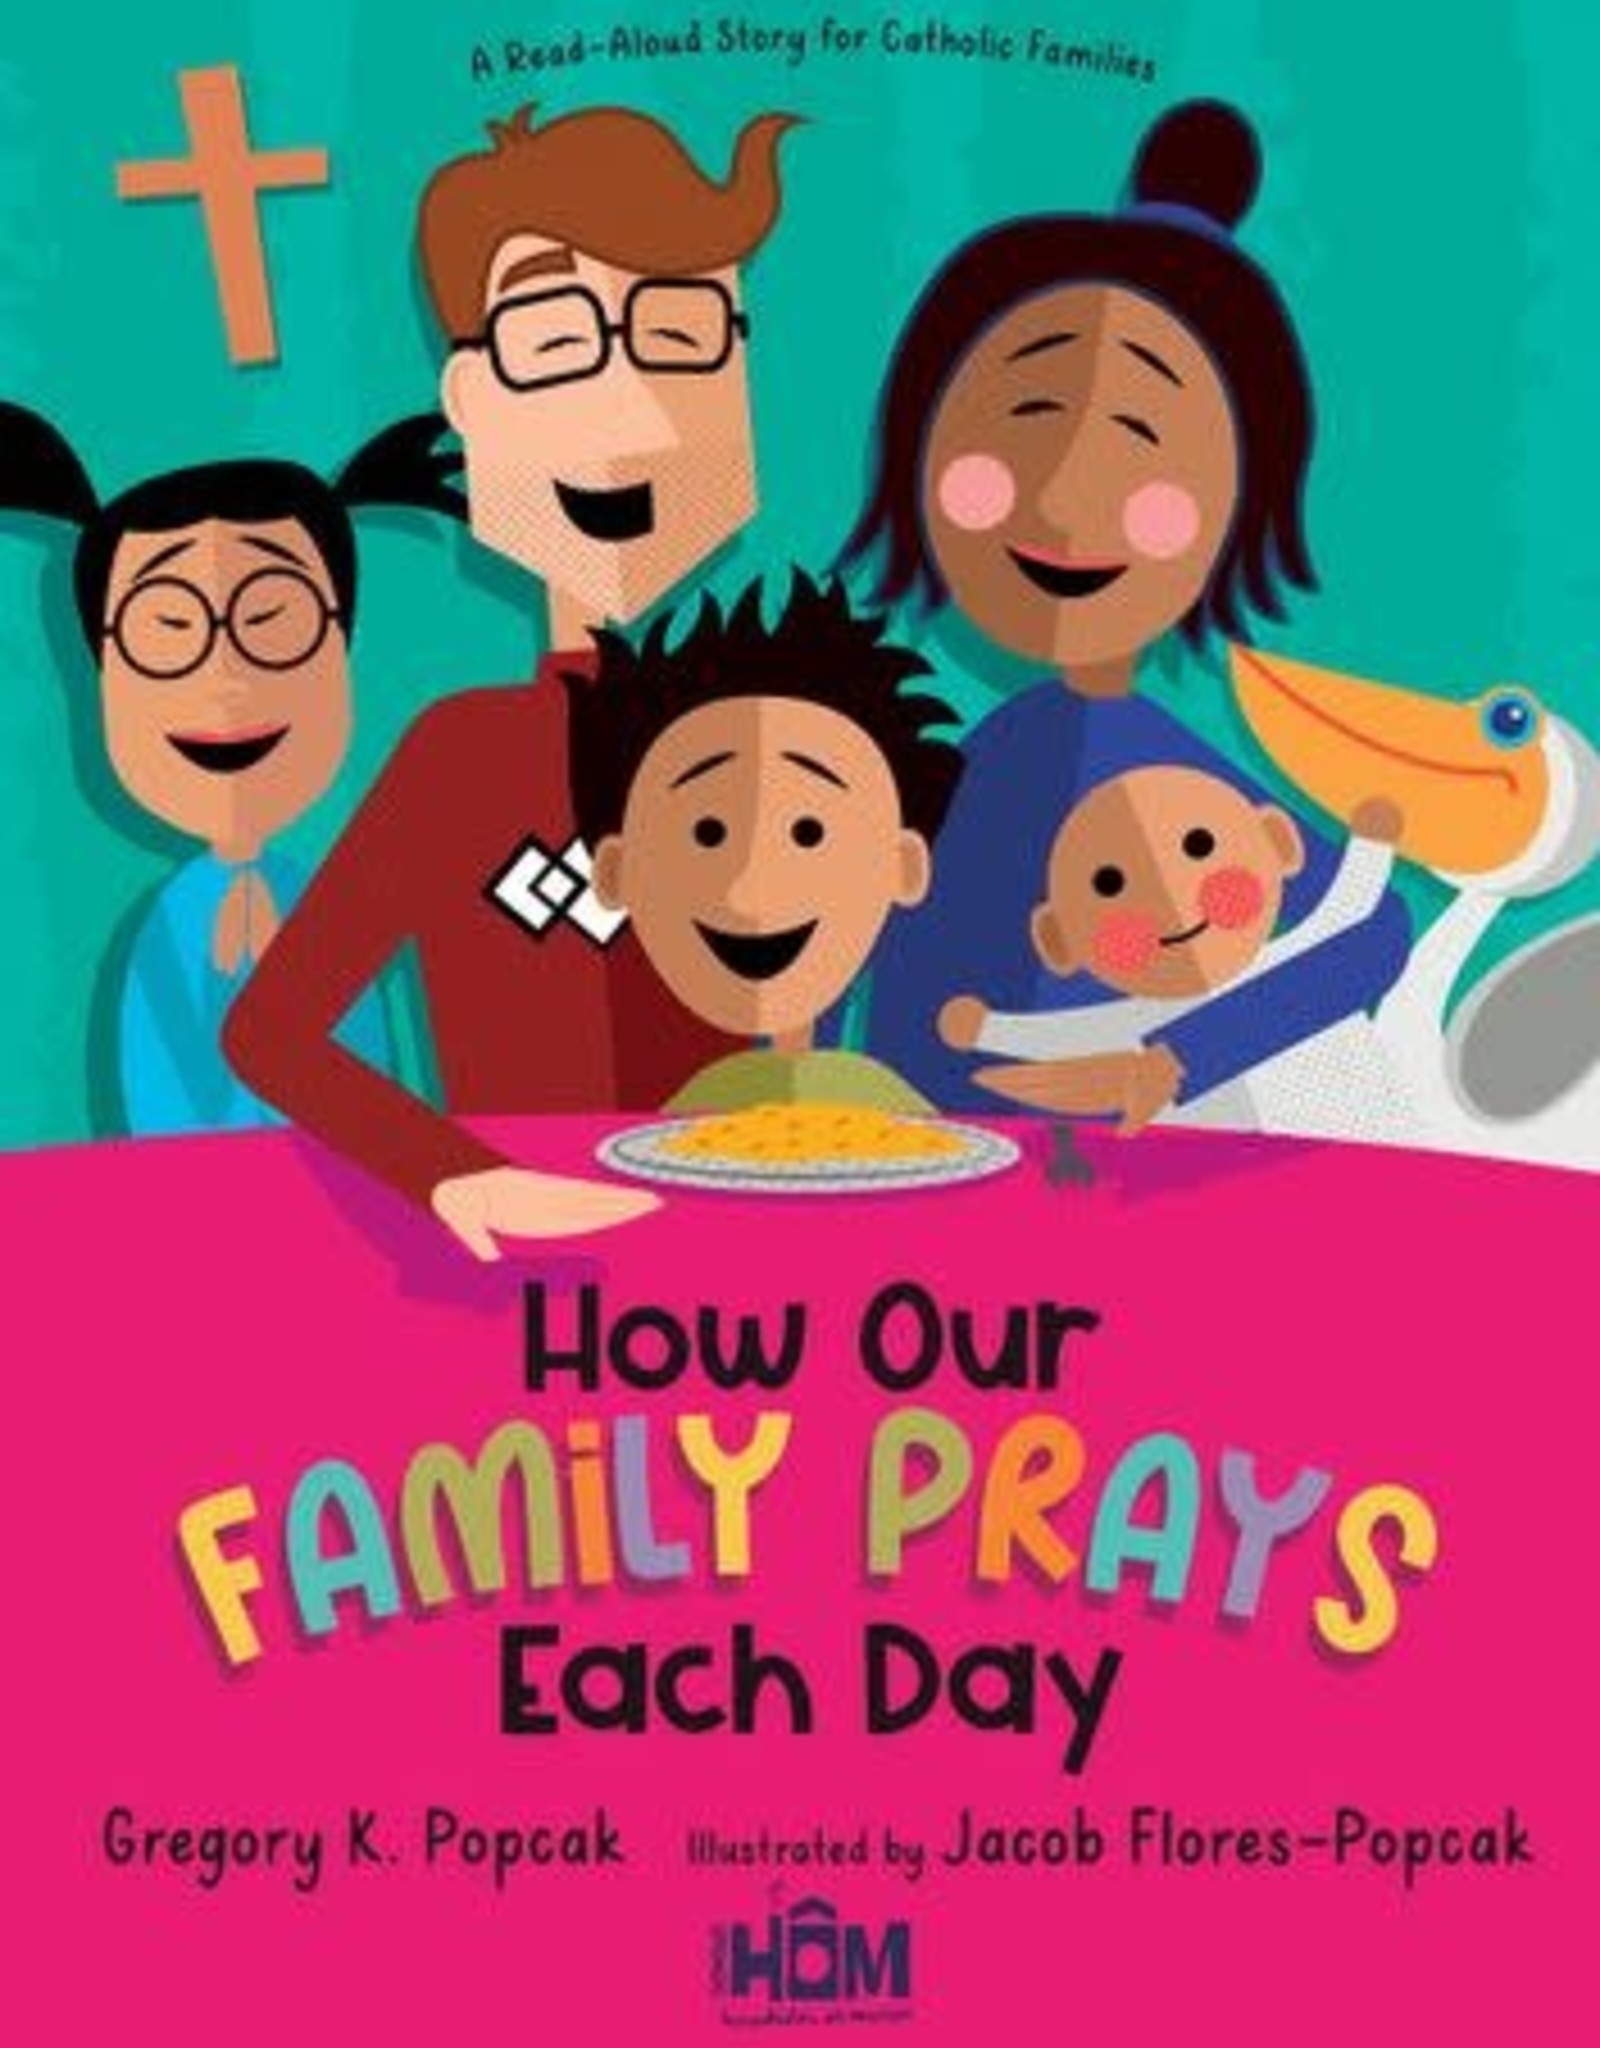 How Our Family Prays Each Day, by Gregory Popcak (hardcover)